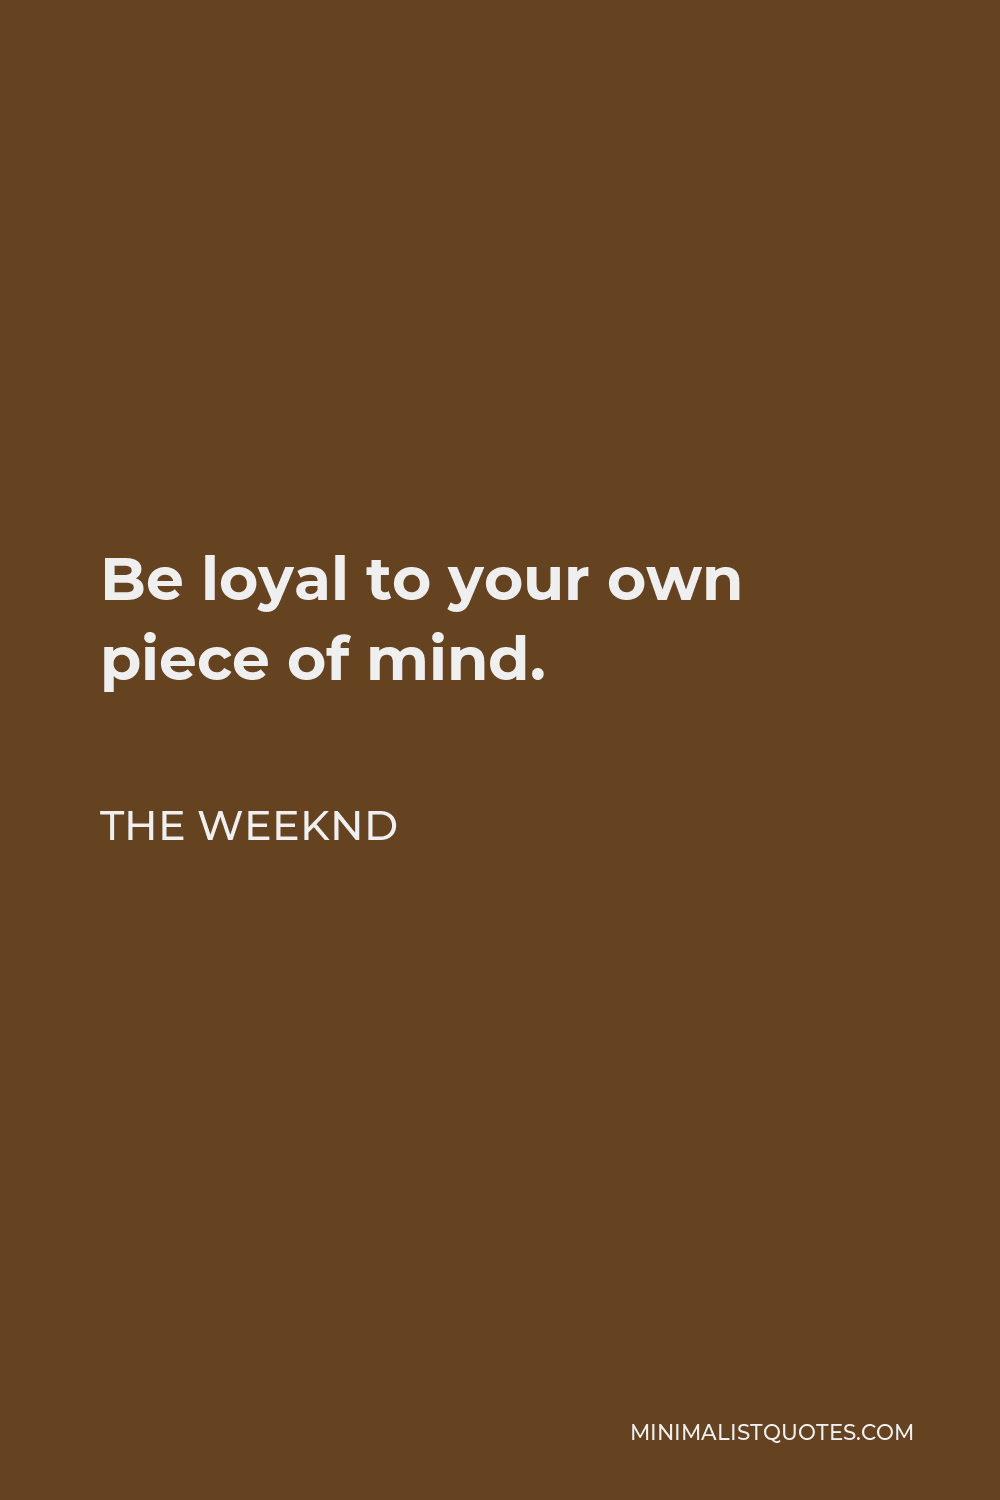 The Weeknd Quote - Be loyal to your own piece of mind.